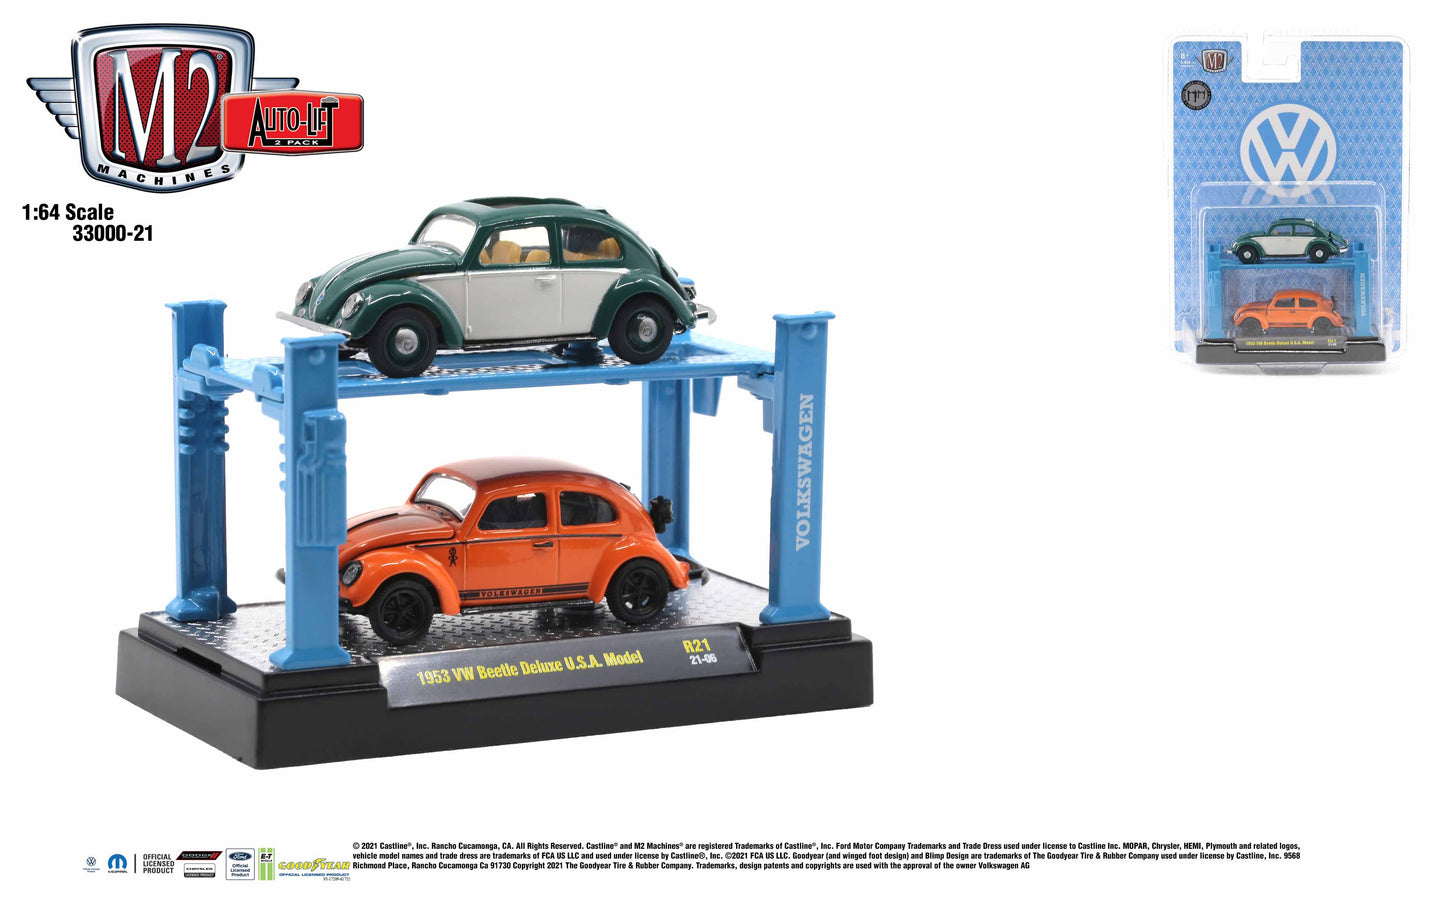 M2 Machines 1:64  2-Pack  Auto-Lift Release 21 - 1953 VW Beetle Deluxe U.S.A. Model